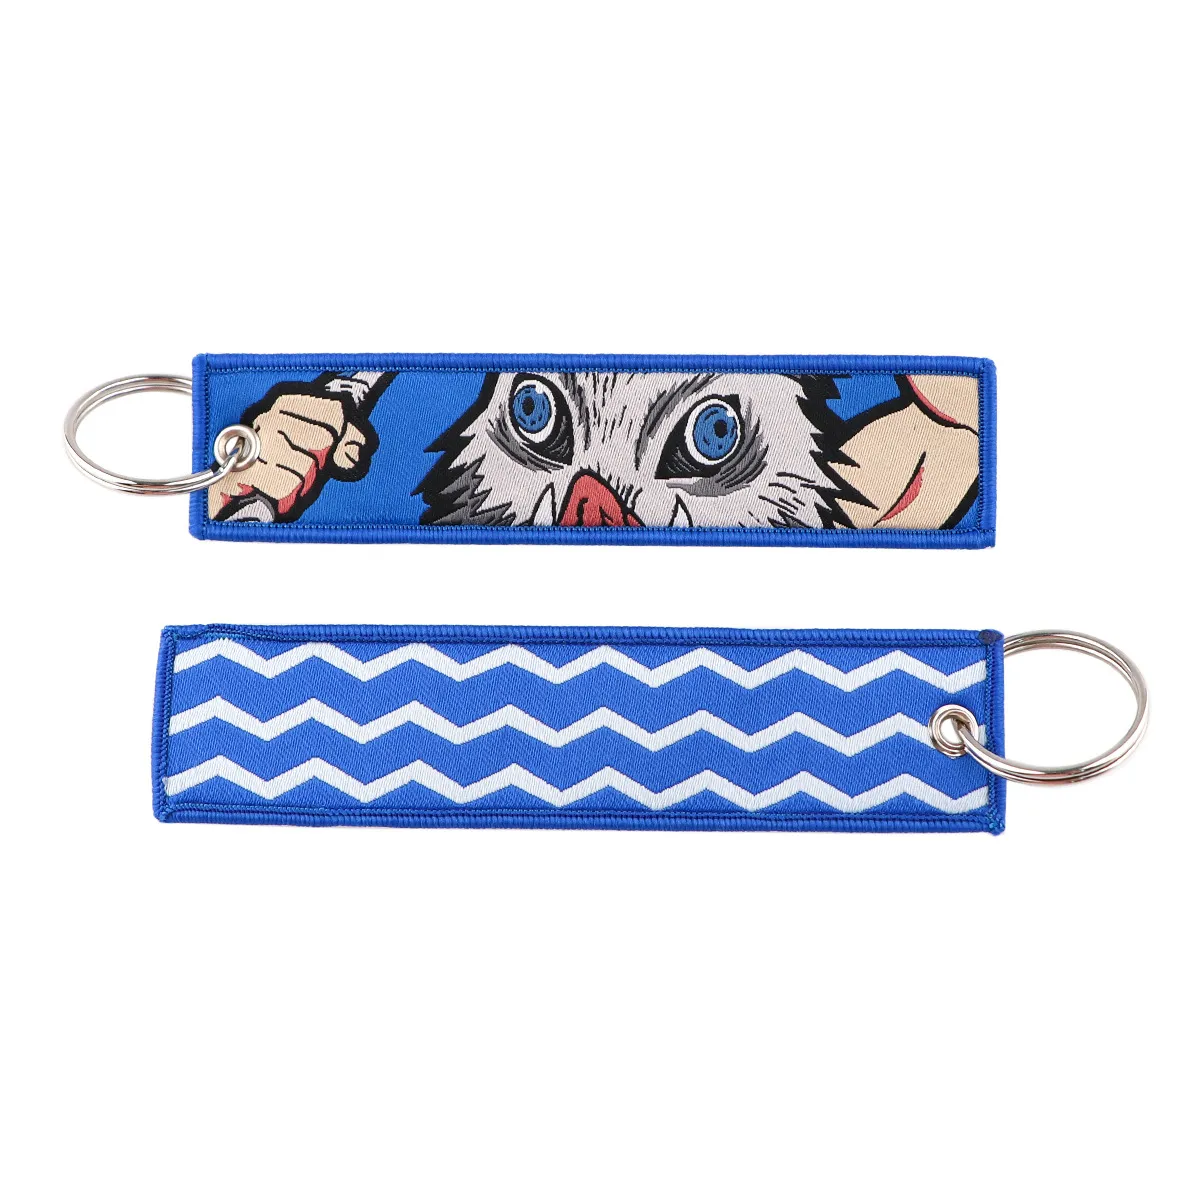 Keychains & Lanyards Various Types Of Cartoon Cool Key Tag Embroidery Fobs For Motorcycles Cars Bag Backpack Keychain Fashion Ring Gi Otwem